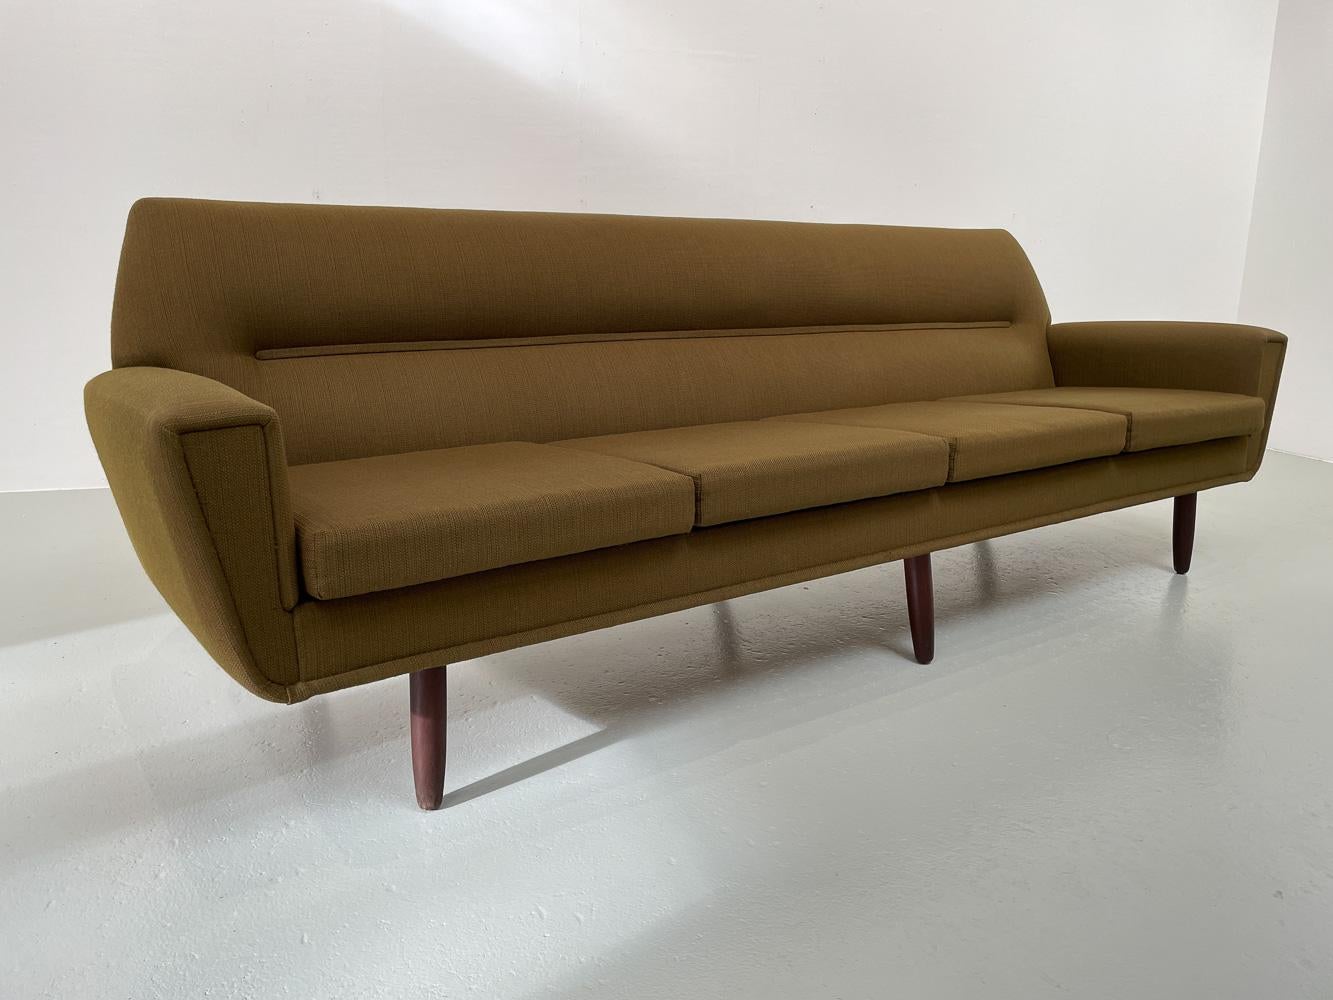 Vintage Danish Green 4-Seater Sofa in Teak and Wool, 1960s.
Mid-Century Modern Danish design 4 seater sofa in original wool upholstery made in Denmark in the 1960s. 
Six round tapered legs. One leg has been replaced with a stained oak leg, other are